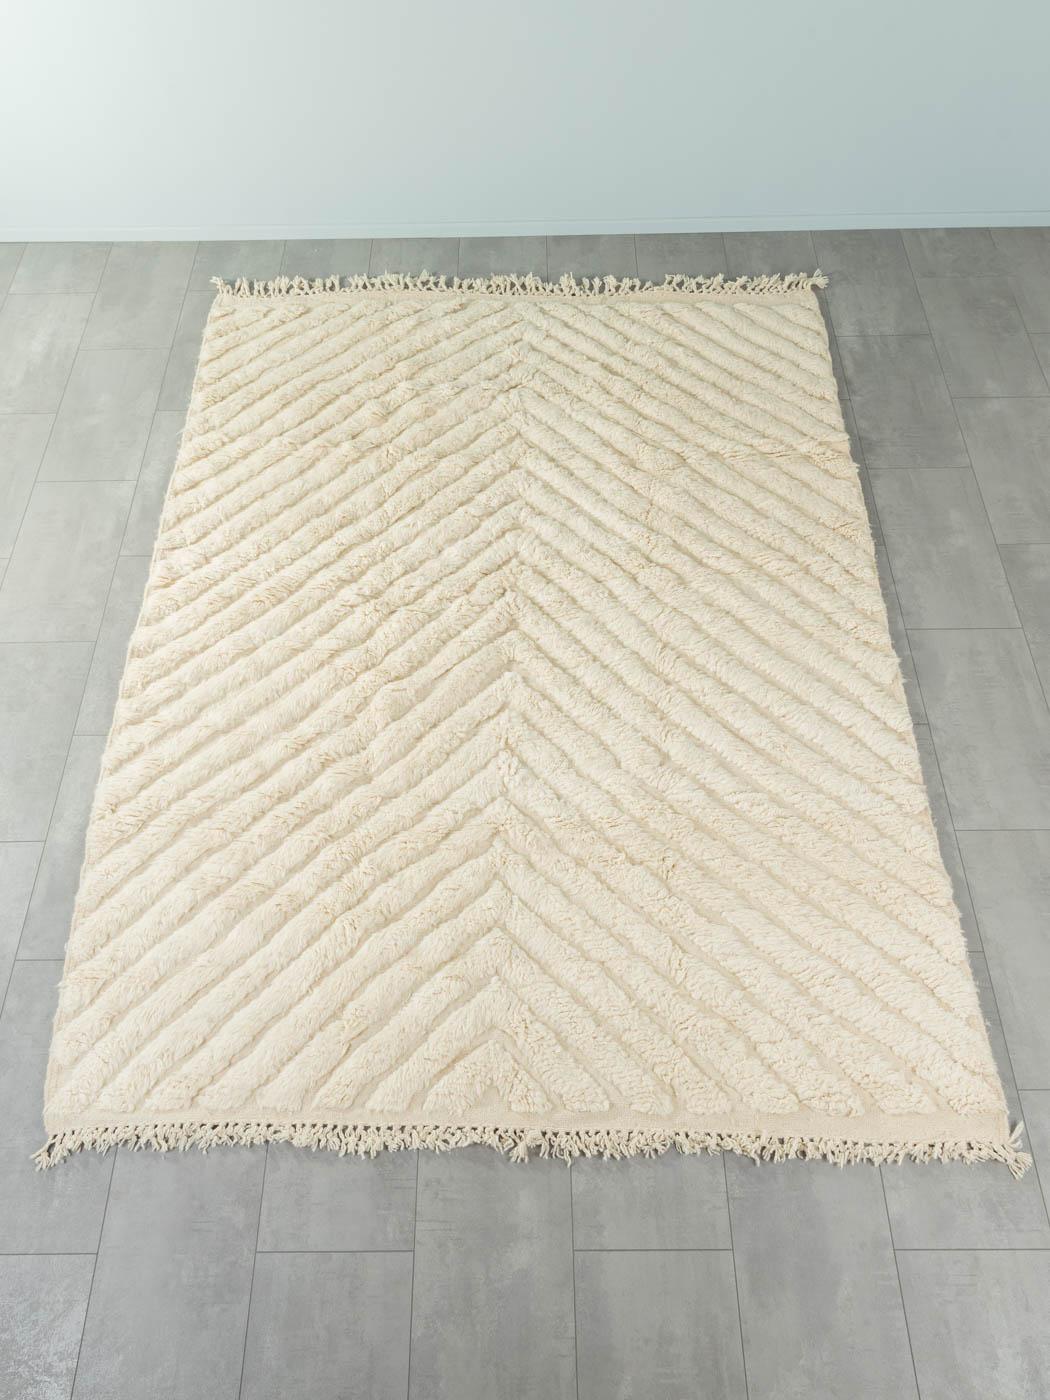 Decent Cream is a contemporary 100% wool rug – thick and soft, comfortable underfoot. Our Berber rugs are handwoven and handknotted by Amazigh women in the Atlas Mountains. These communities have been crafting rugs for thousands of years. One knot